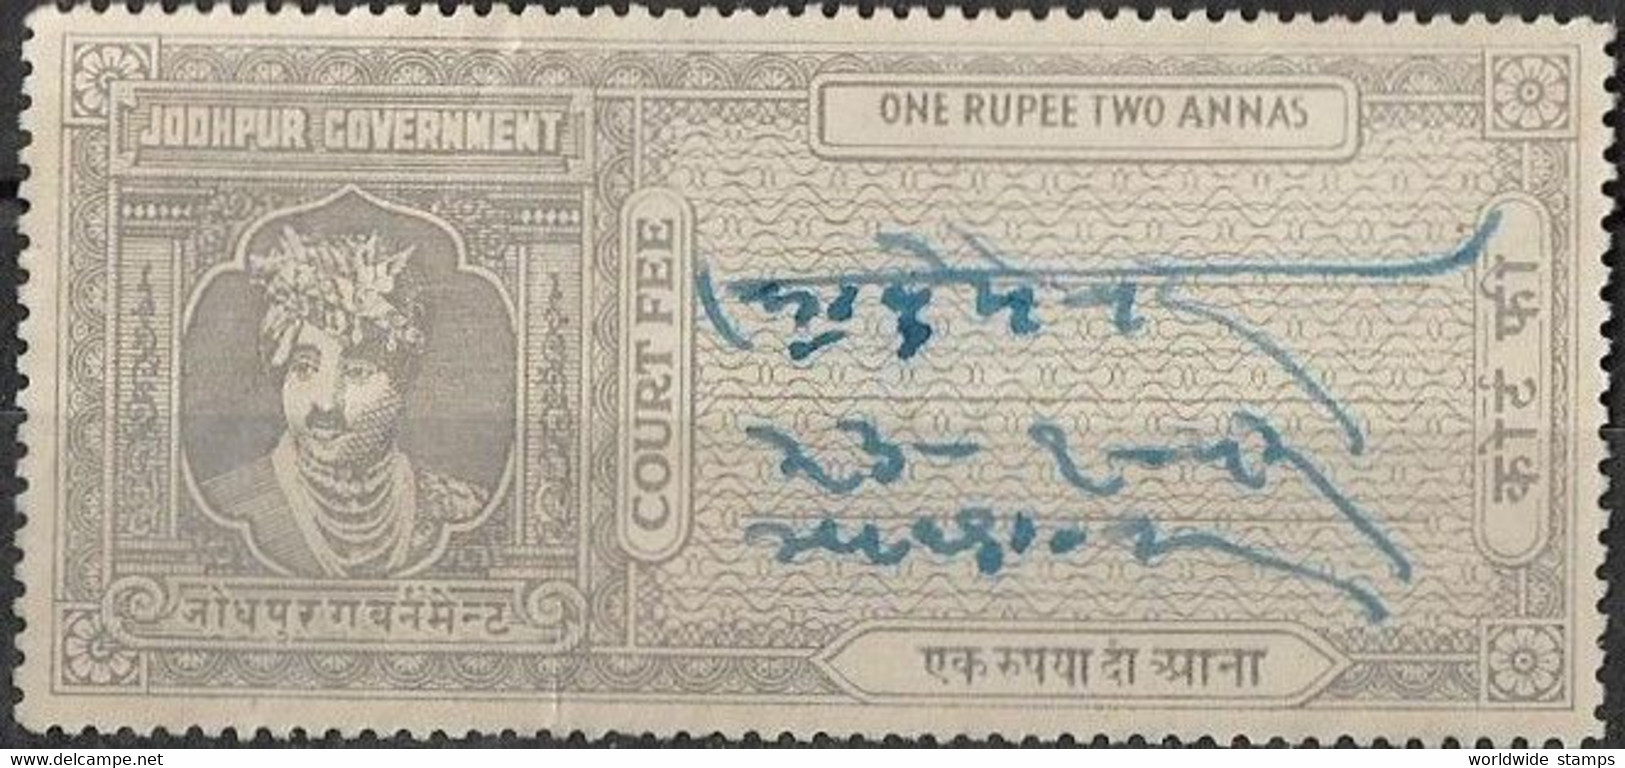 INDIA JAIPUR 1948 COURT FEE One Rupee Four Annas FEUDATARY STATE REVENUE.STAMPS VERY FINE CONDITION - Jaipur